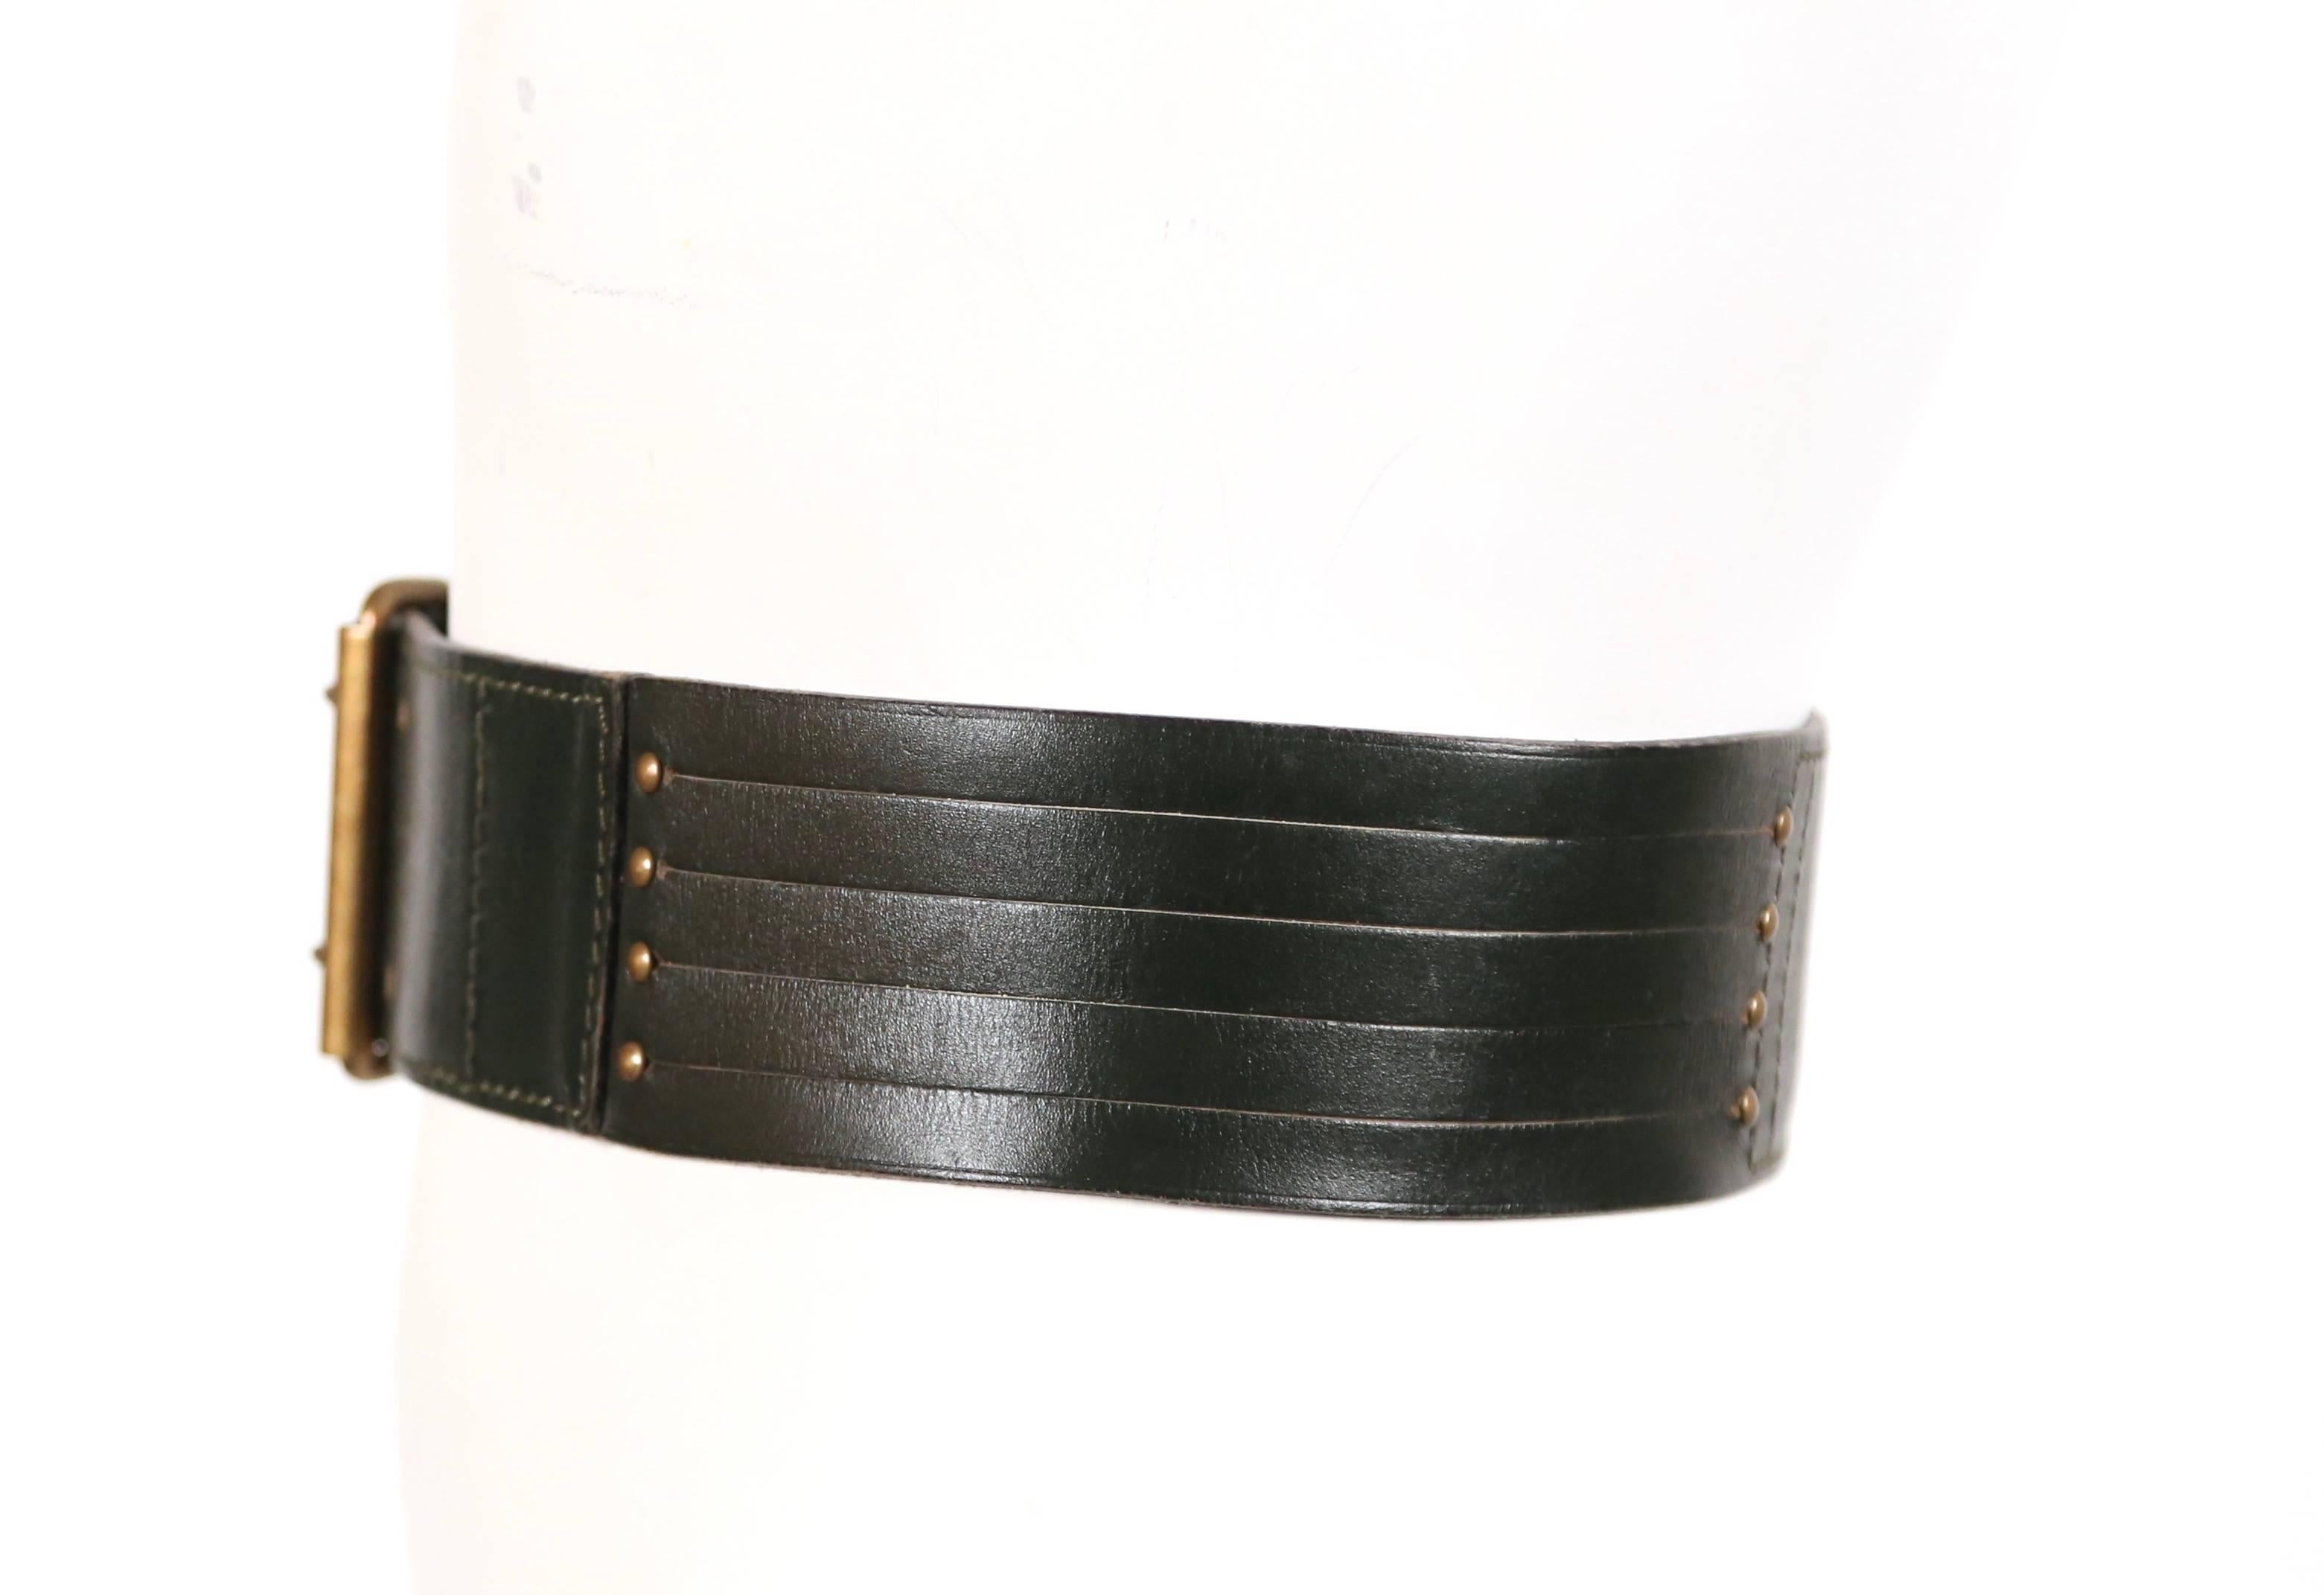 Darkest green leather belt with brass hardware designed by Azzedine Alaia dating to the 1990's. French size 70. Holes fall at approximately:  26